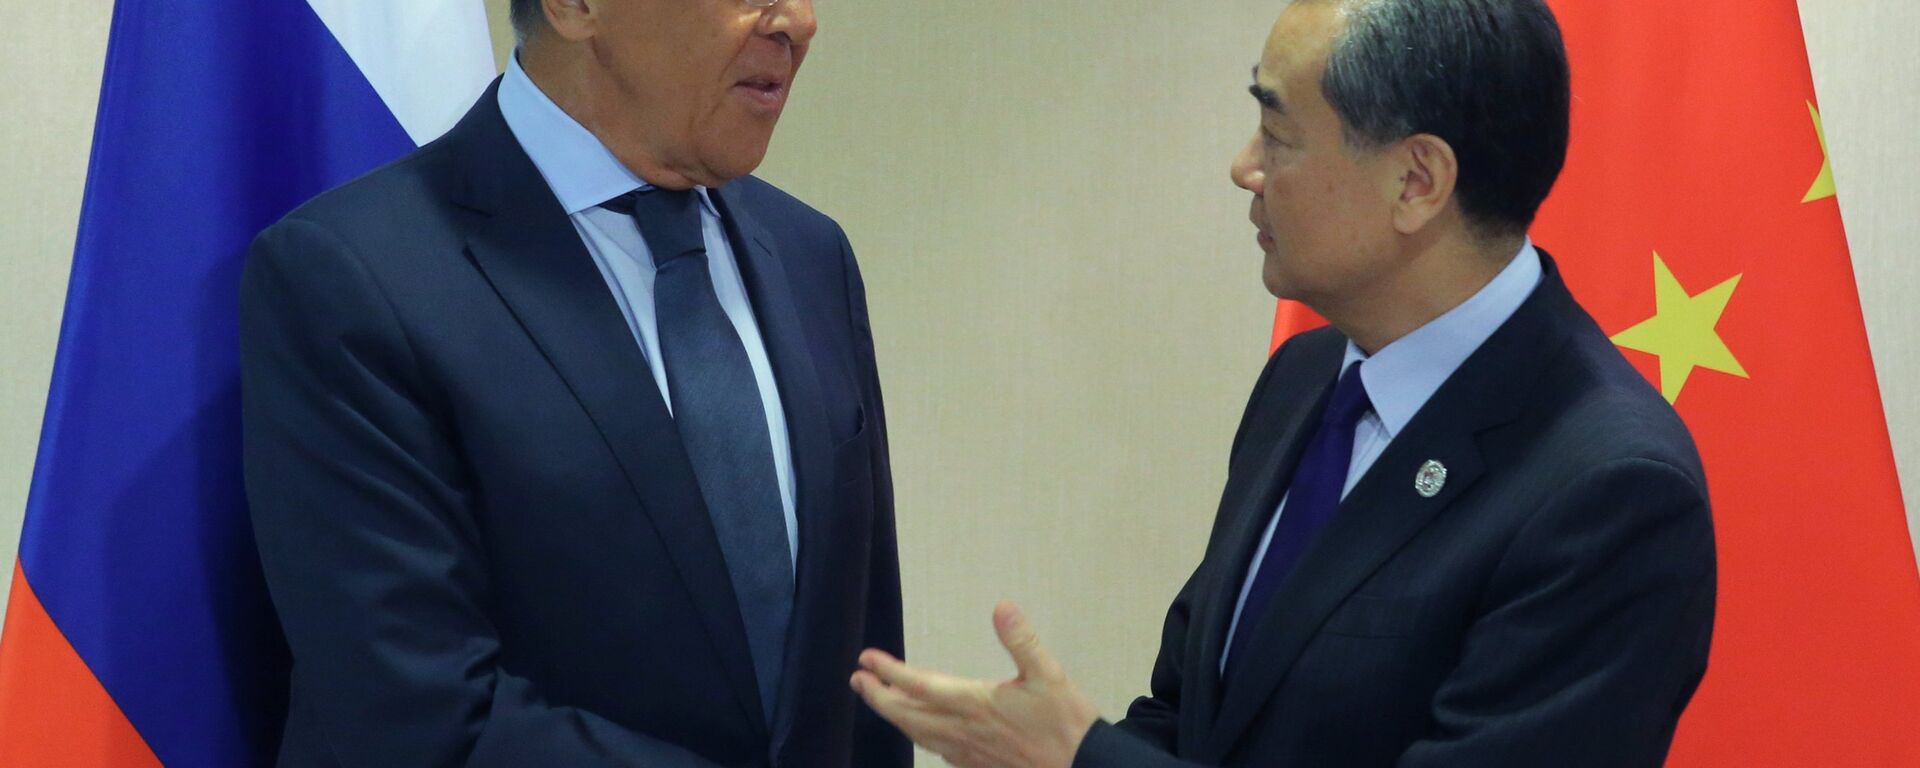 Russian Foreign Minister Sergei Lavrov, left, and Chinese Foreign Minister Wang Yi at their meeting on the sidelines of the ASEAN regional security summit in Manila, Philippines - Sputnik International, 1920, 30.03.2022